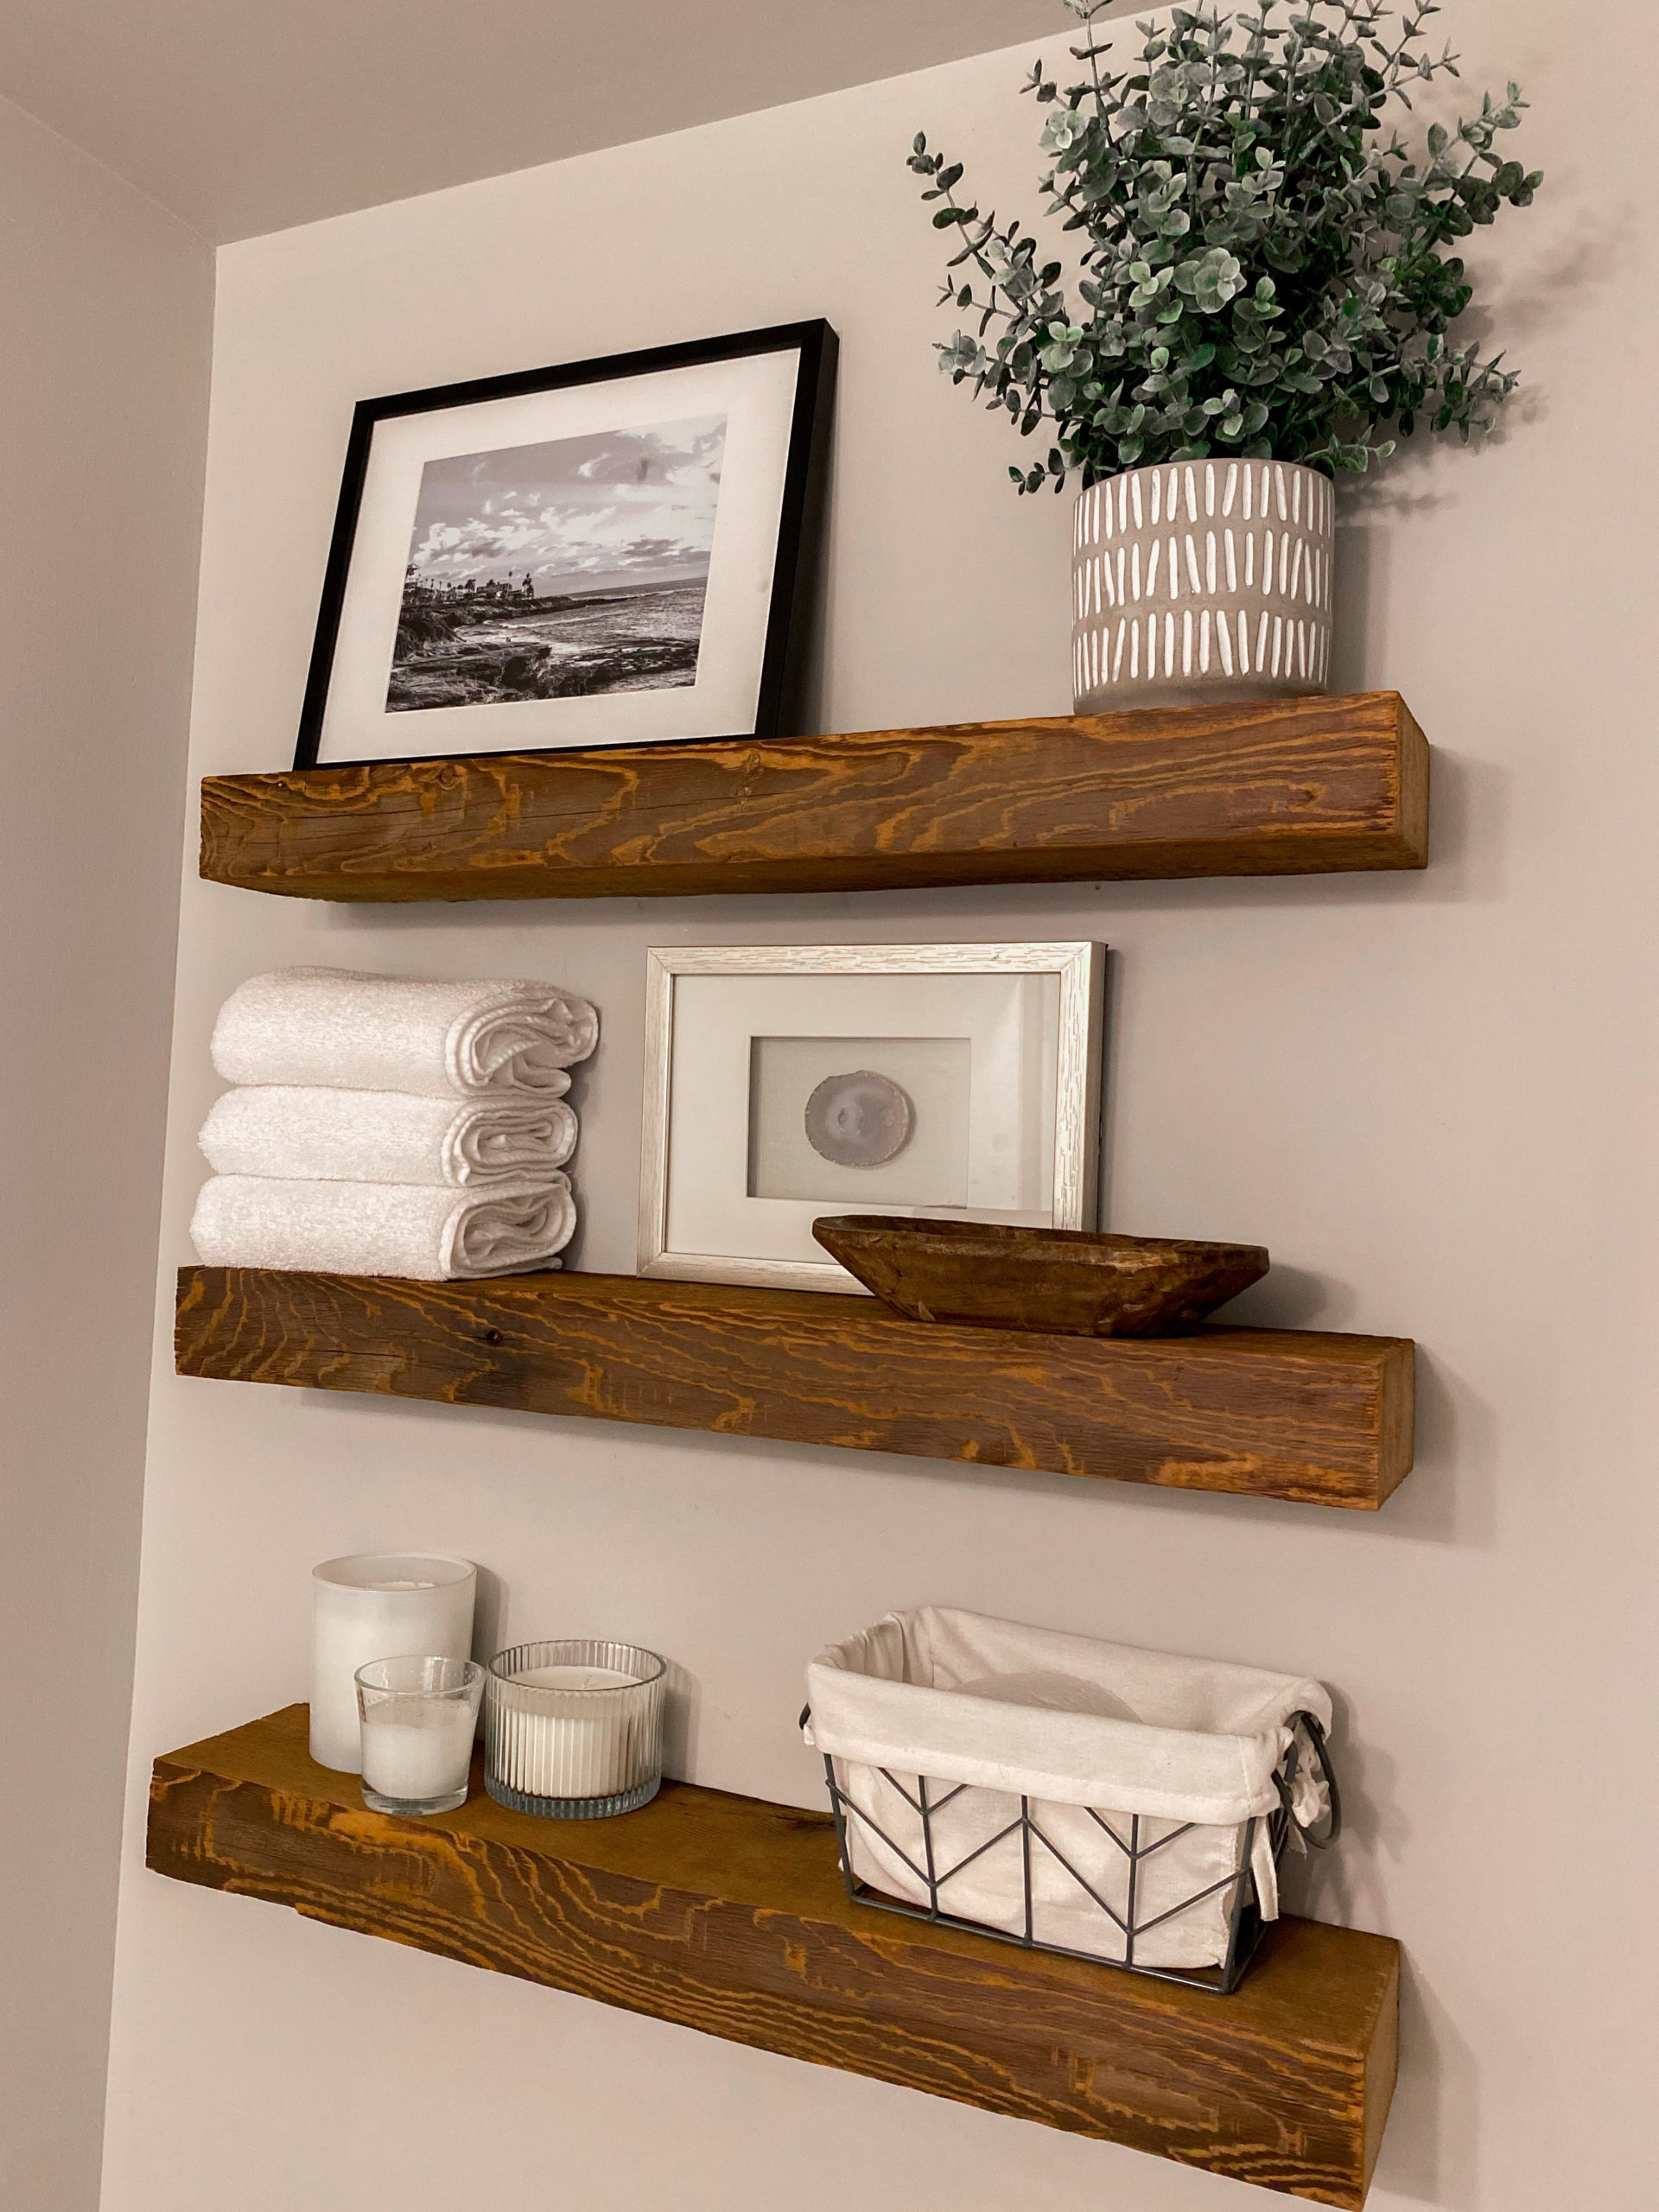 How to Decorate Floating Shelves in a Bathroom